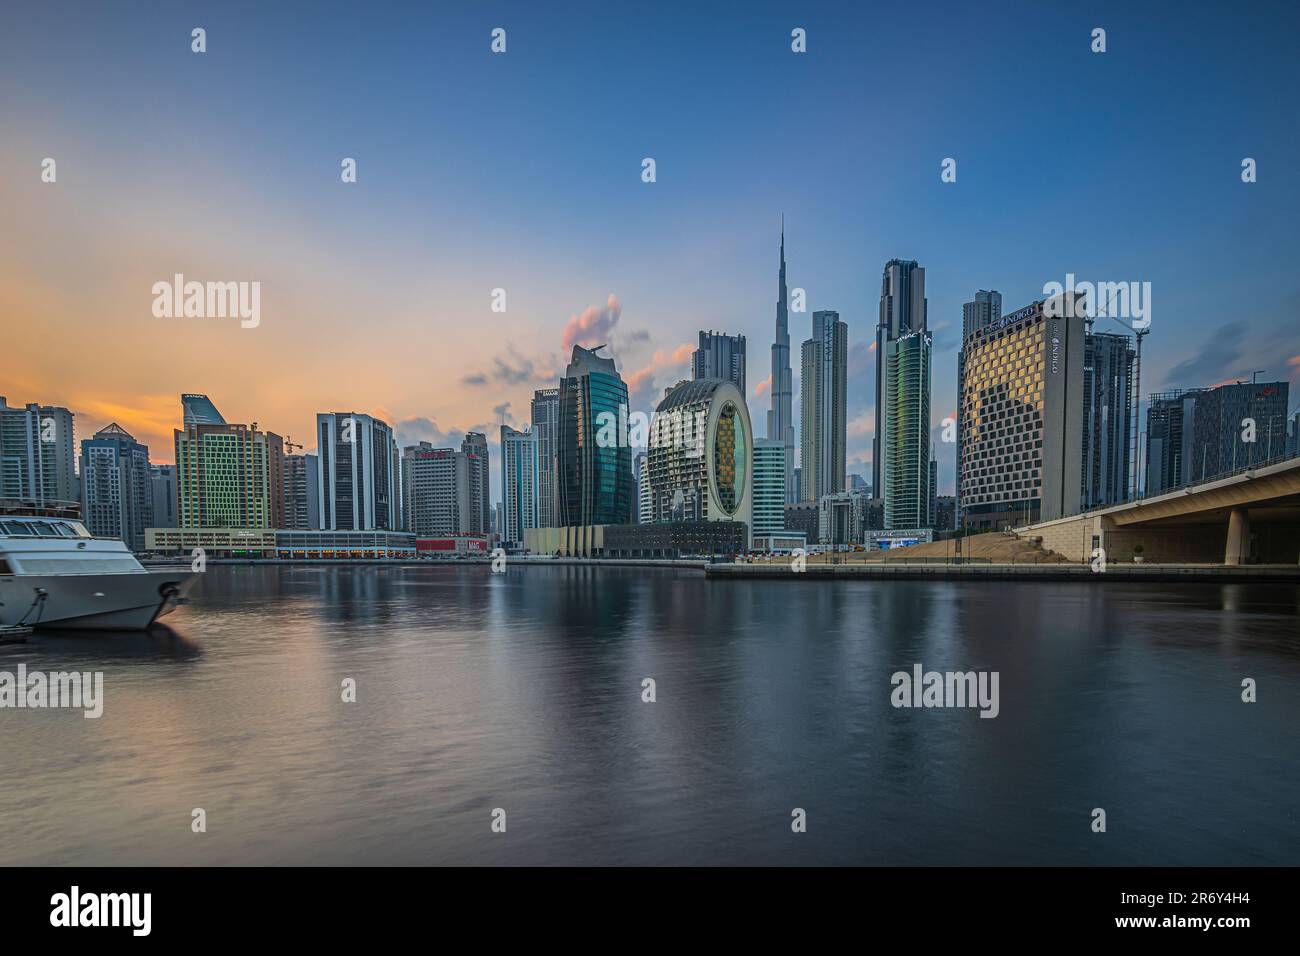 Skyline with skyscrapers of Dubai in the United Arab Emirates. City center with business and office buildings in the evening at sunset. Port with boat Stock Photo